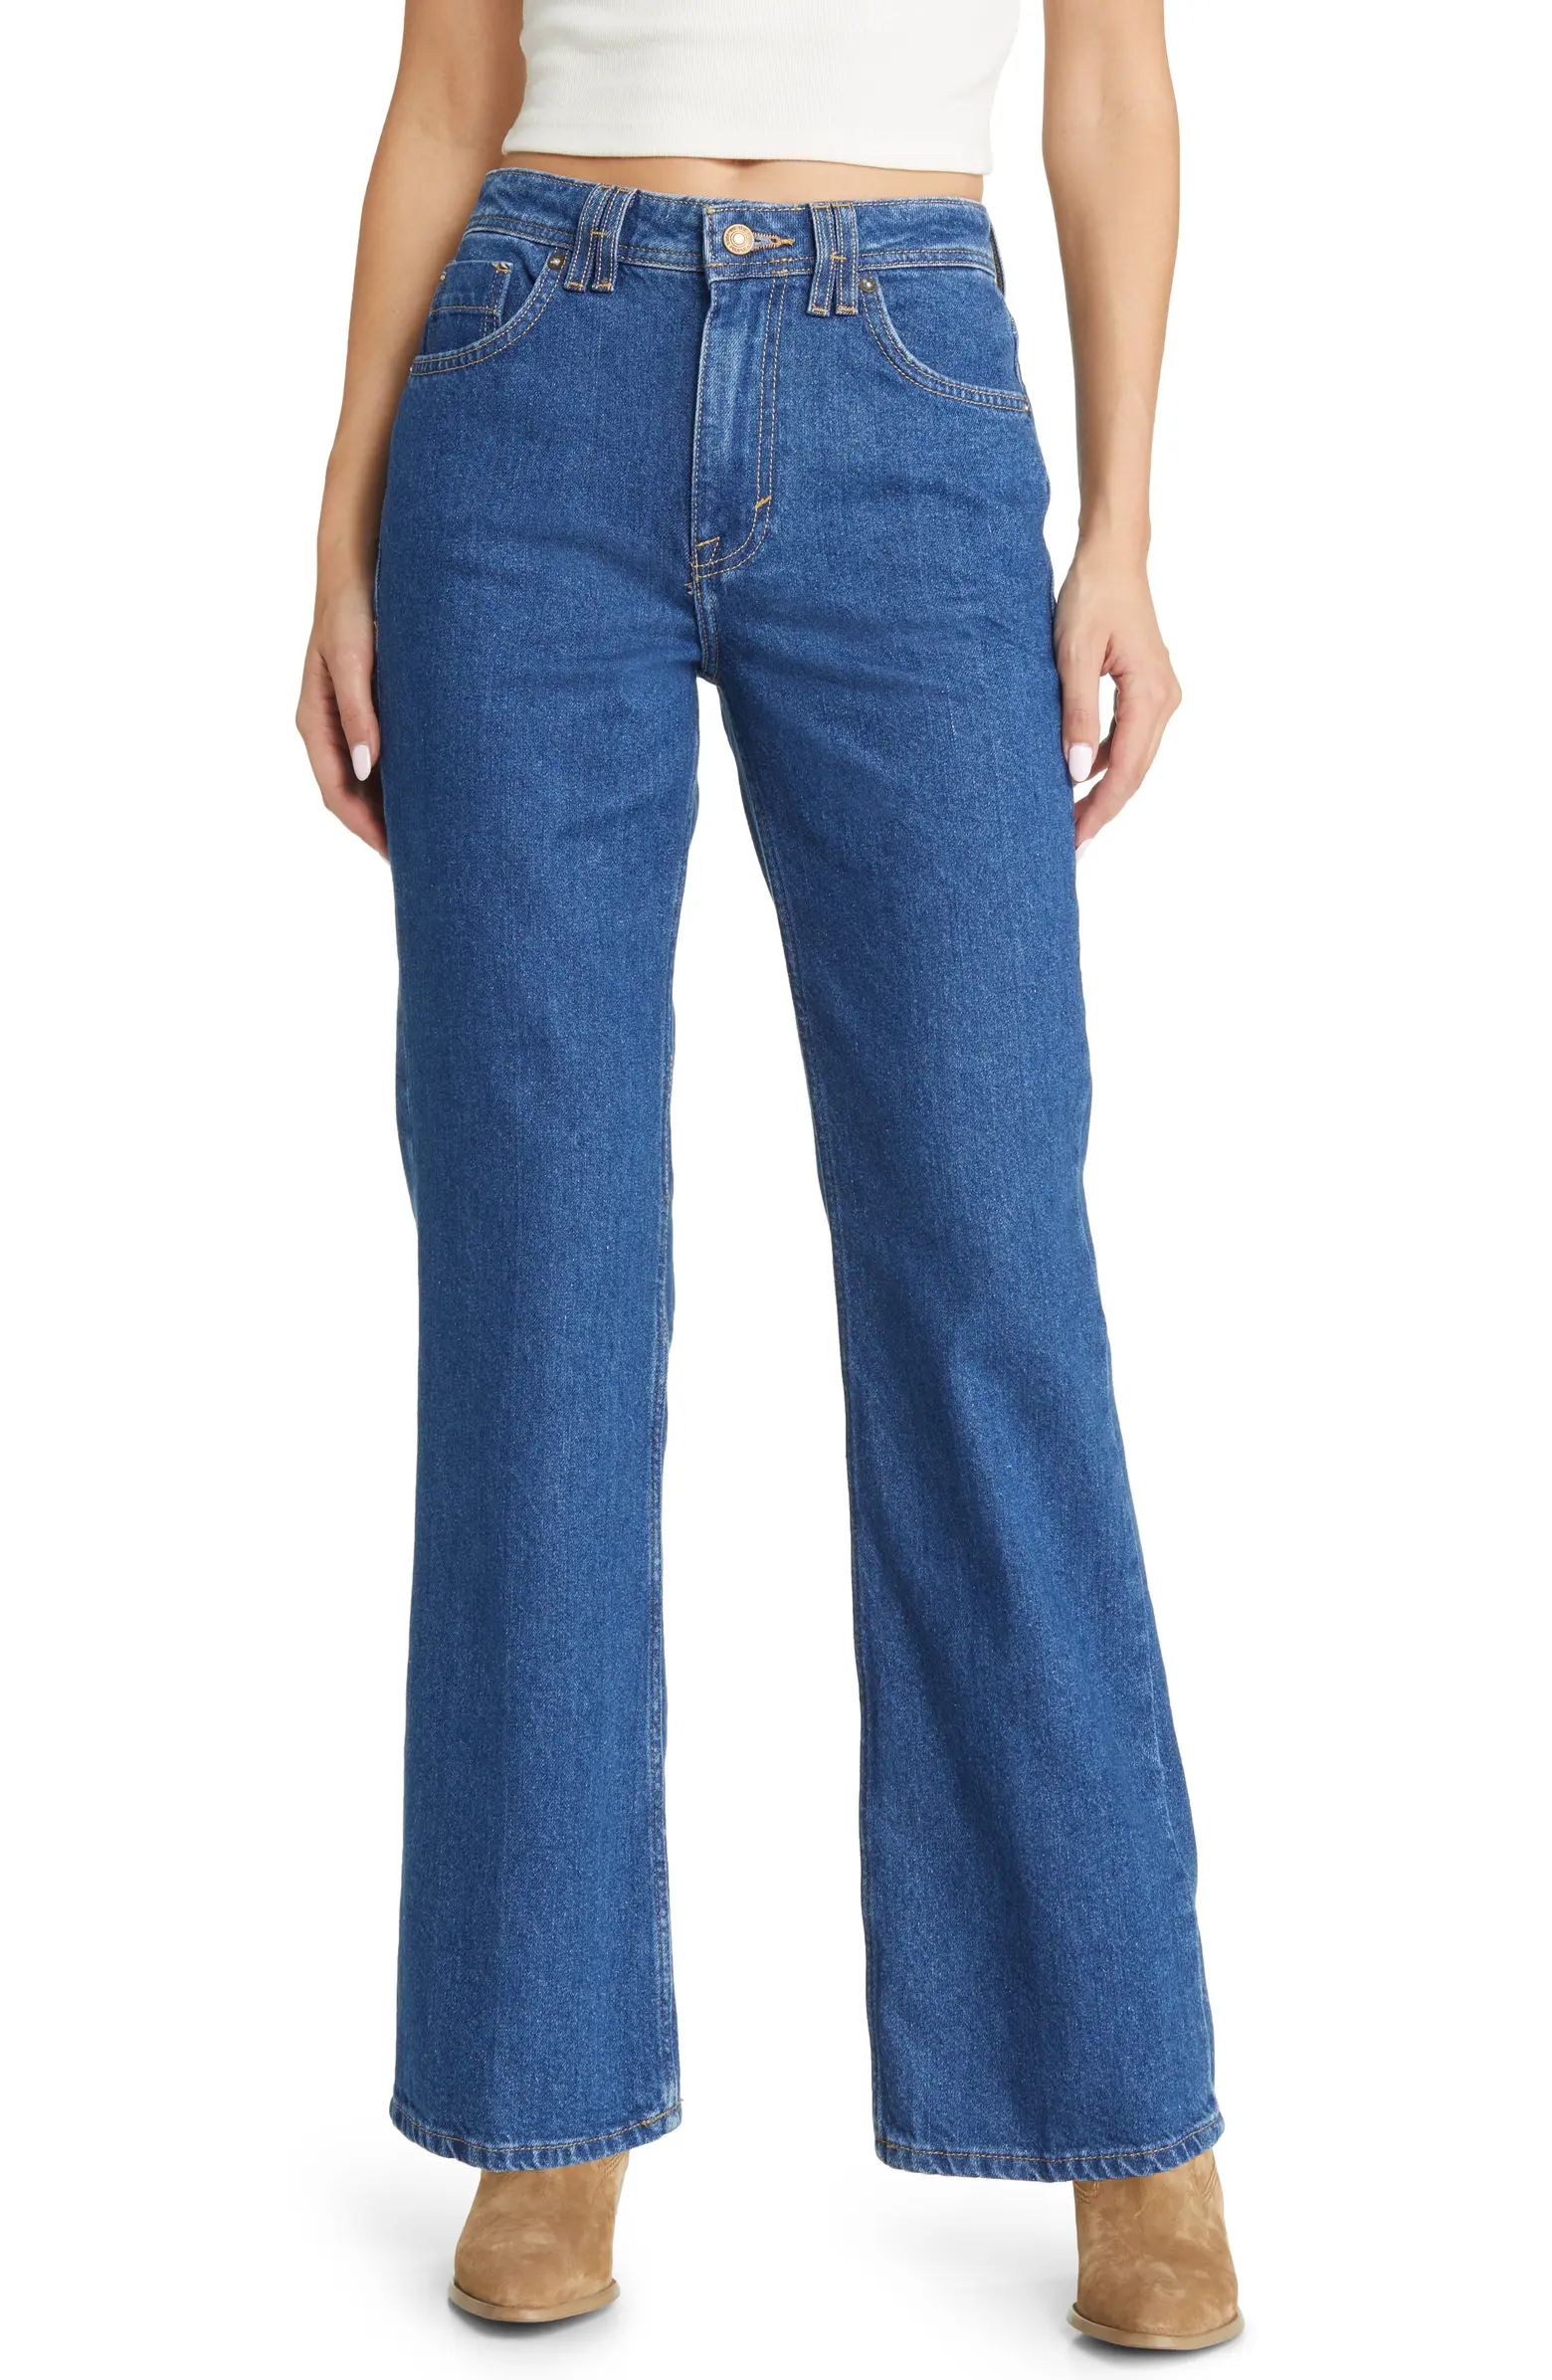 Free People We the Free Ava High Waist Nonstretch Denim Bootcut Jeans | Nordstrom | Nordstrom